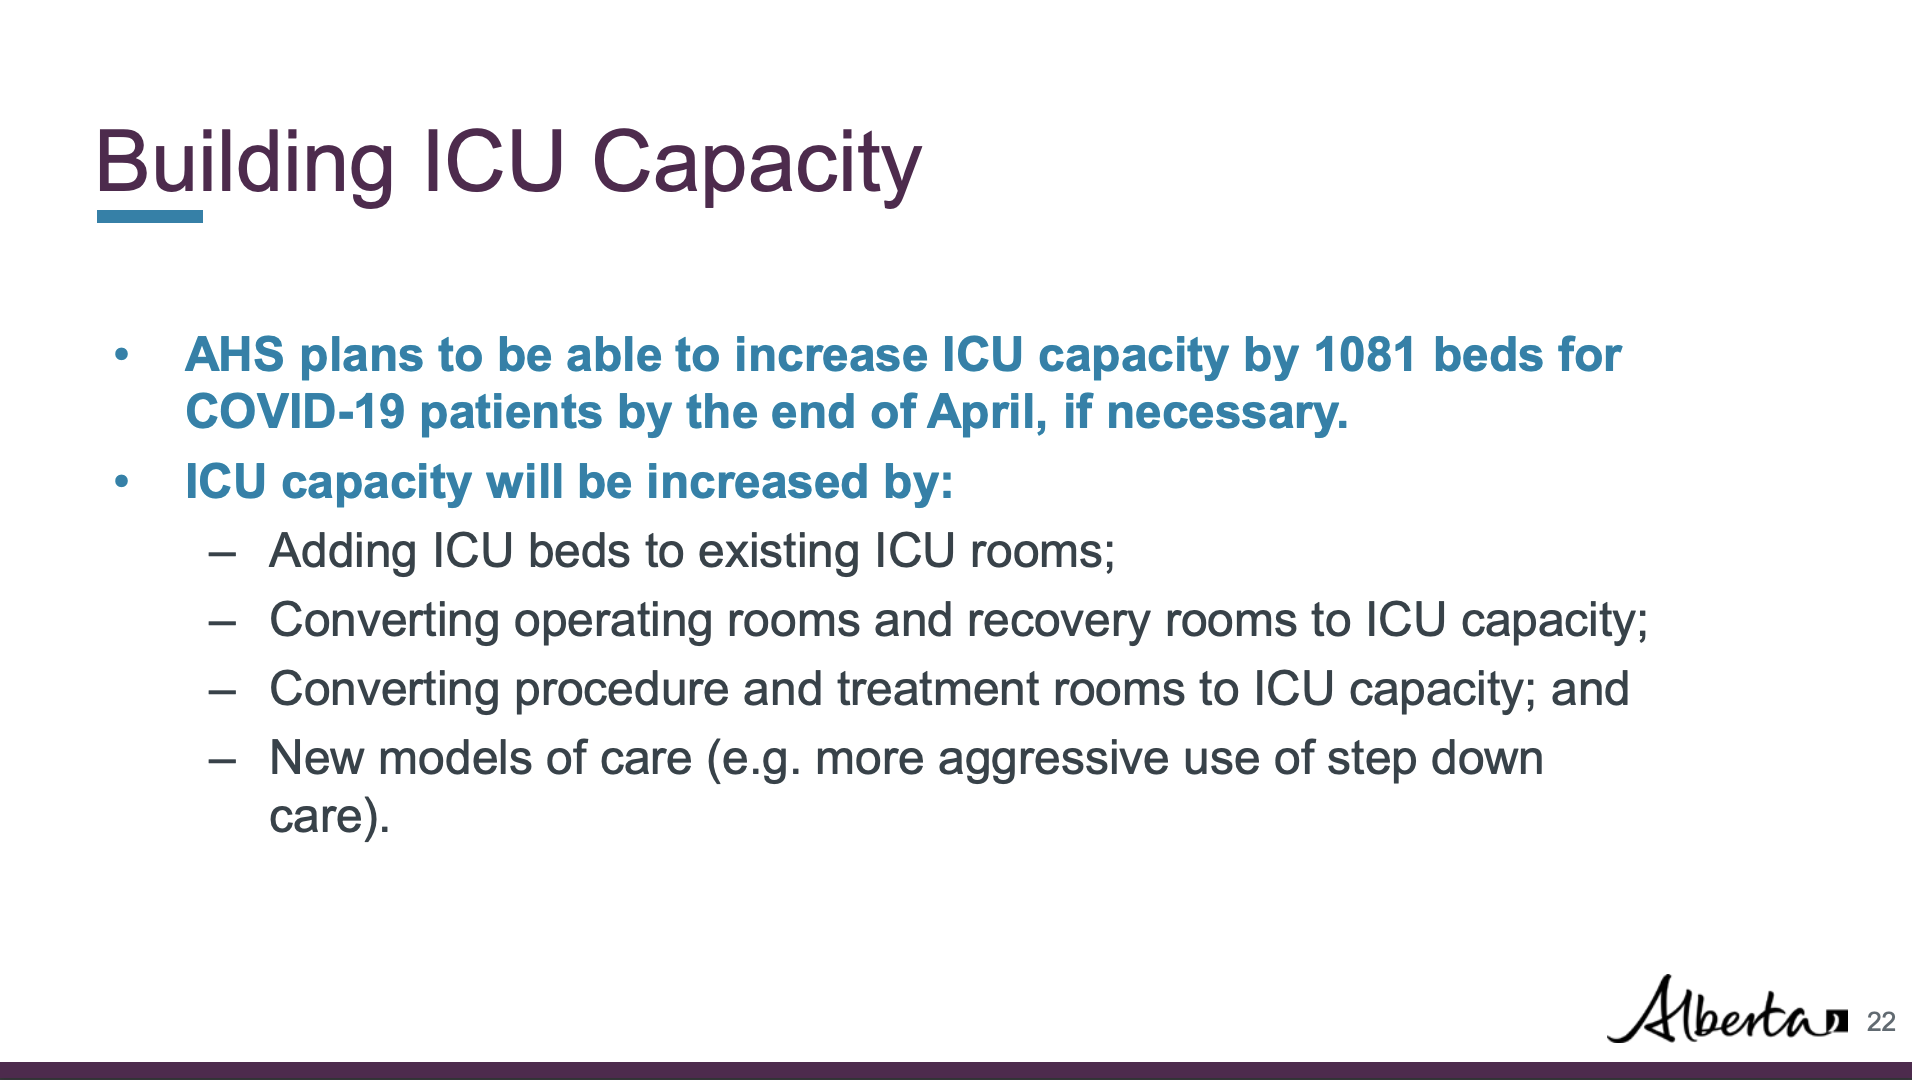 Note that this official government update presentation says that “AHS plans” on increasing the capacity, which means it wasn’t just something the UCP government was just asserting the AHS should do.